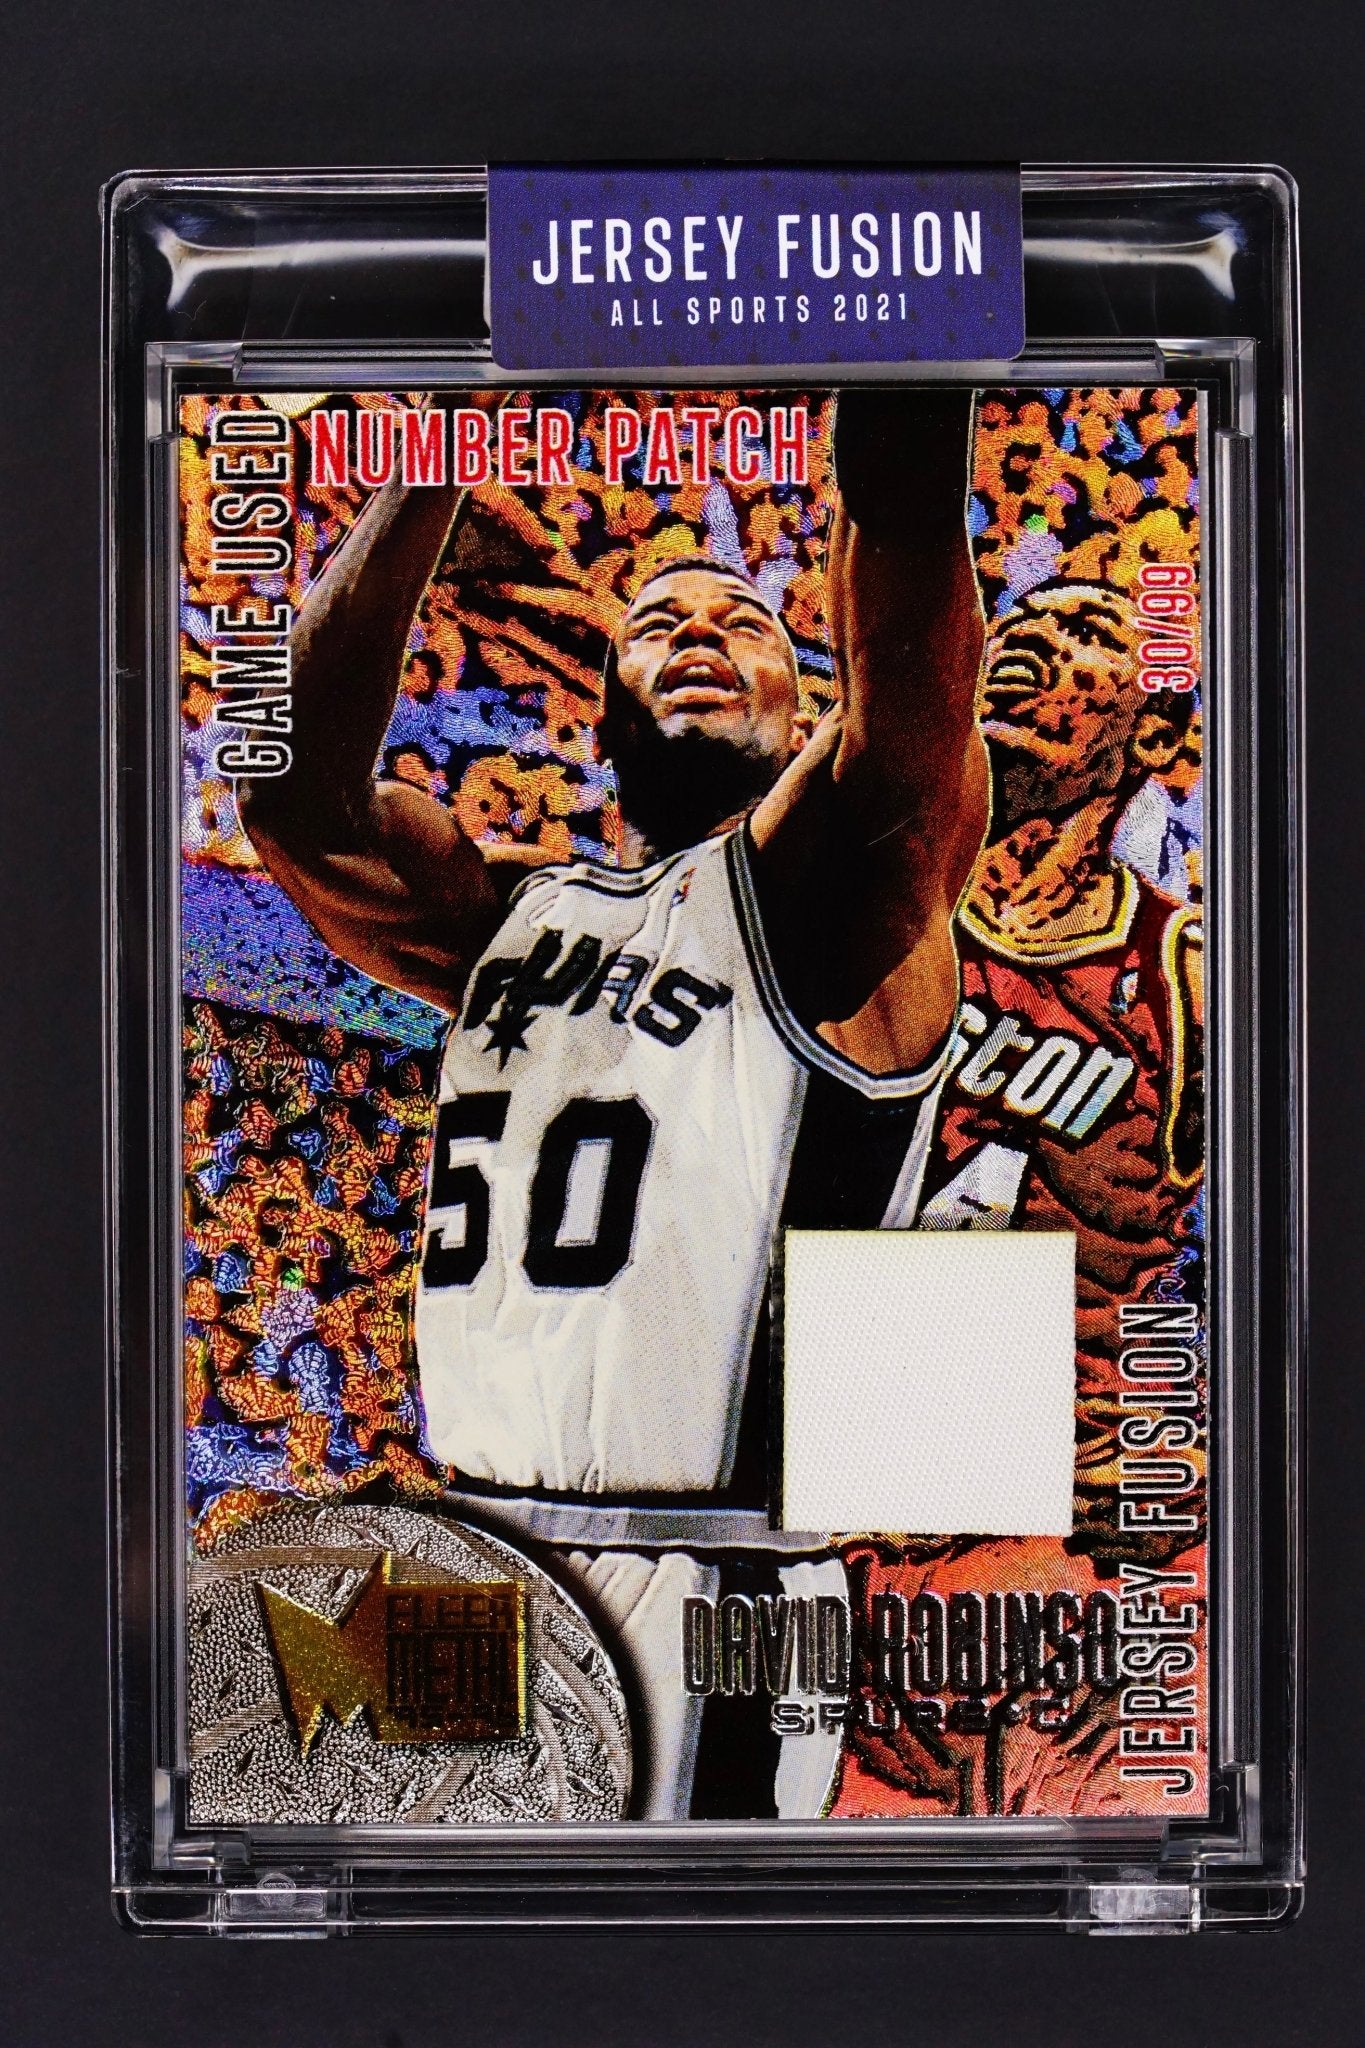 Basketball Card: David Robinson 30/99 Number patch - THE CARD SPOT PTY LTD.Sports CardJersey Fusion